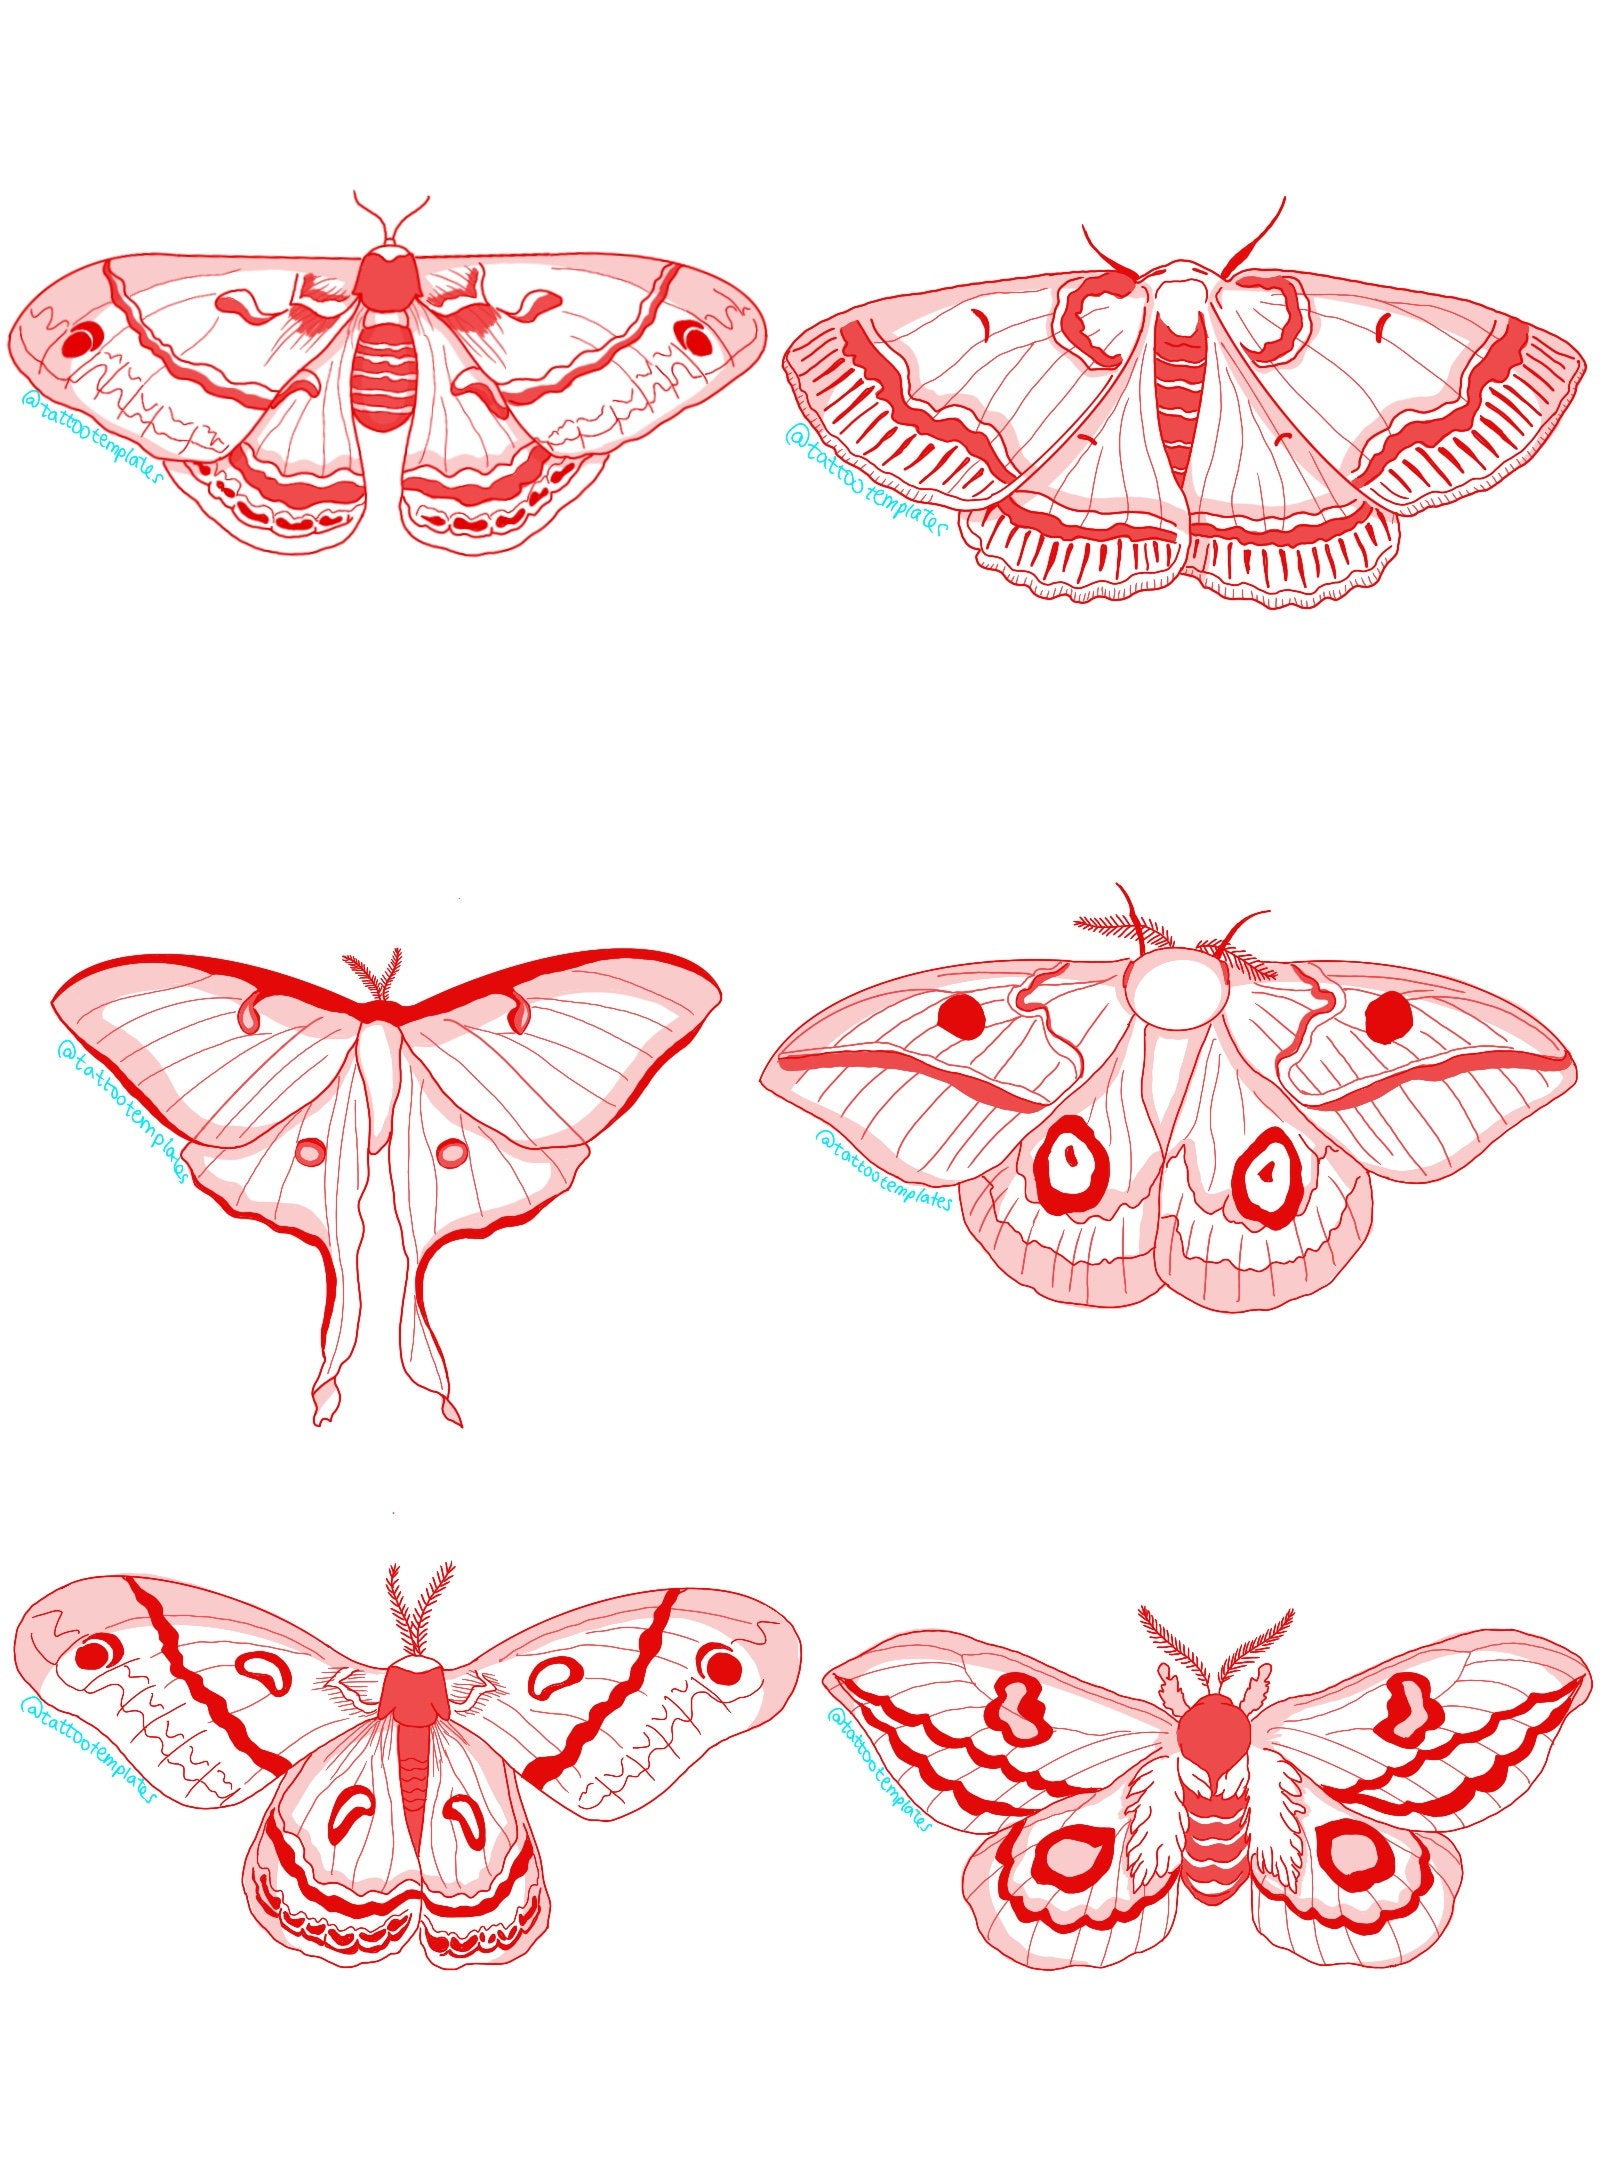 Buy Red Ink Moth Tattoo Designs Online in India  Etsy